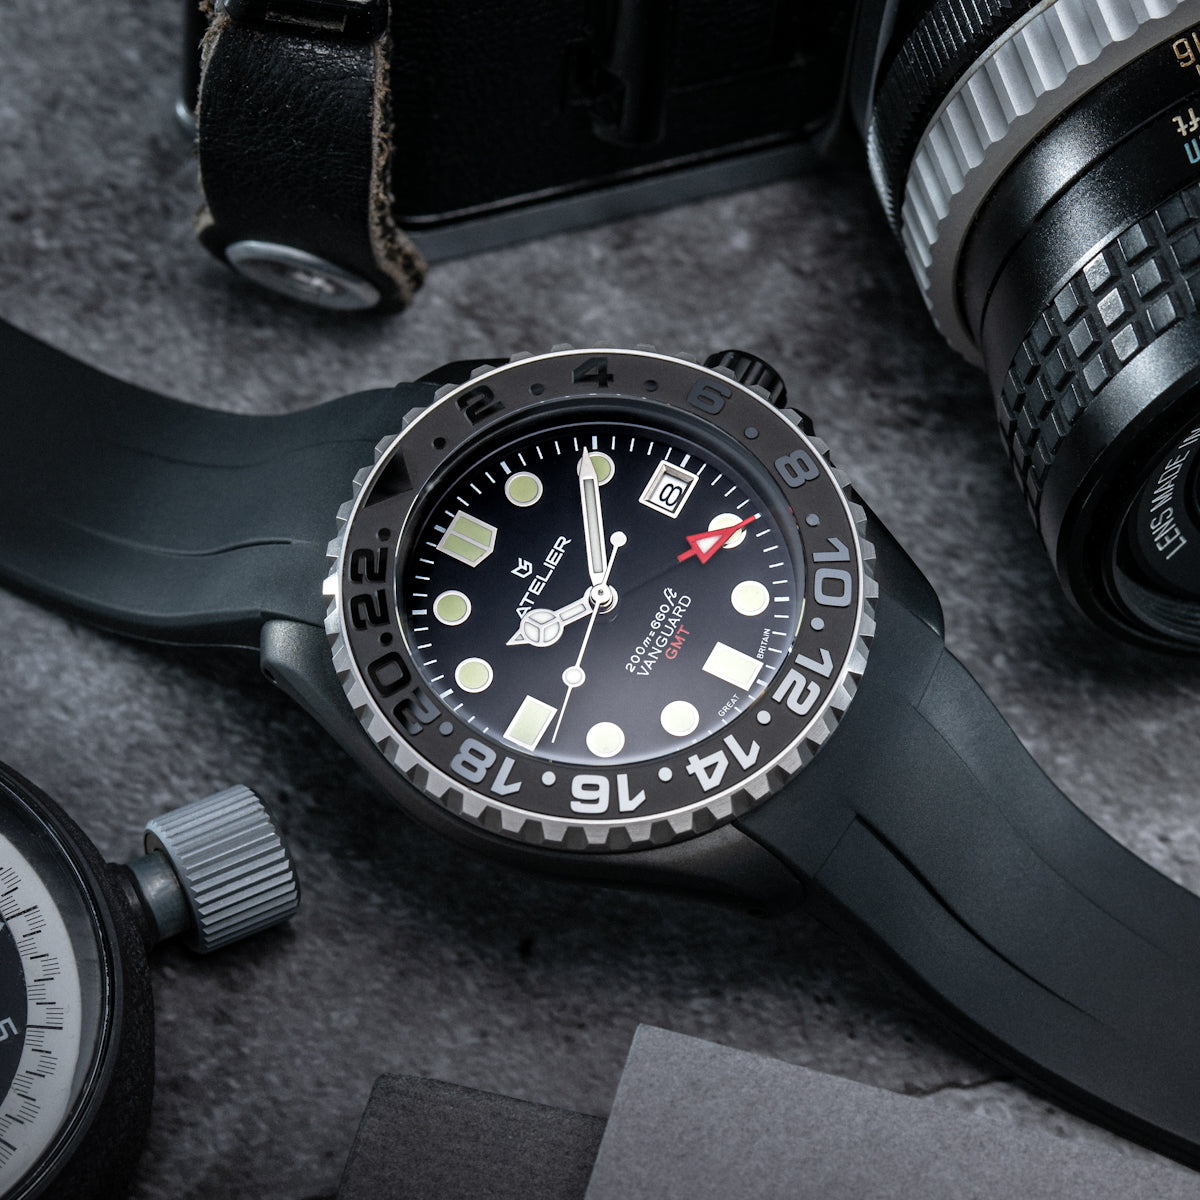 blacked out GMT watch